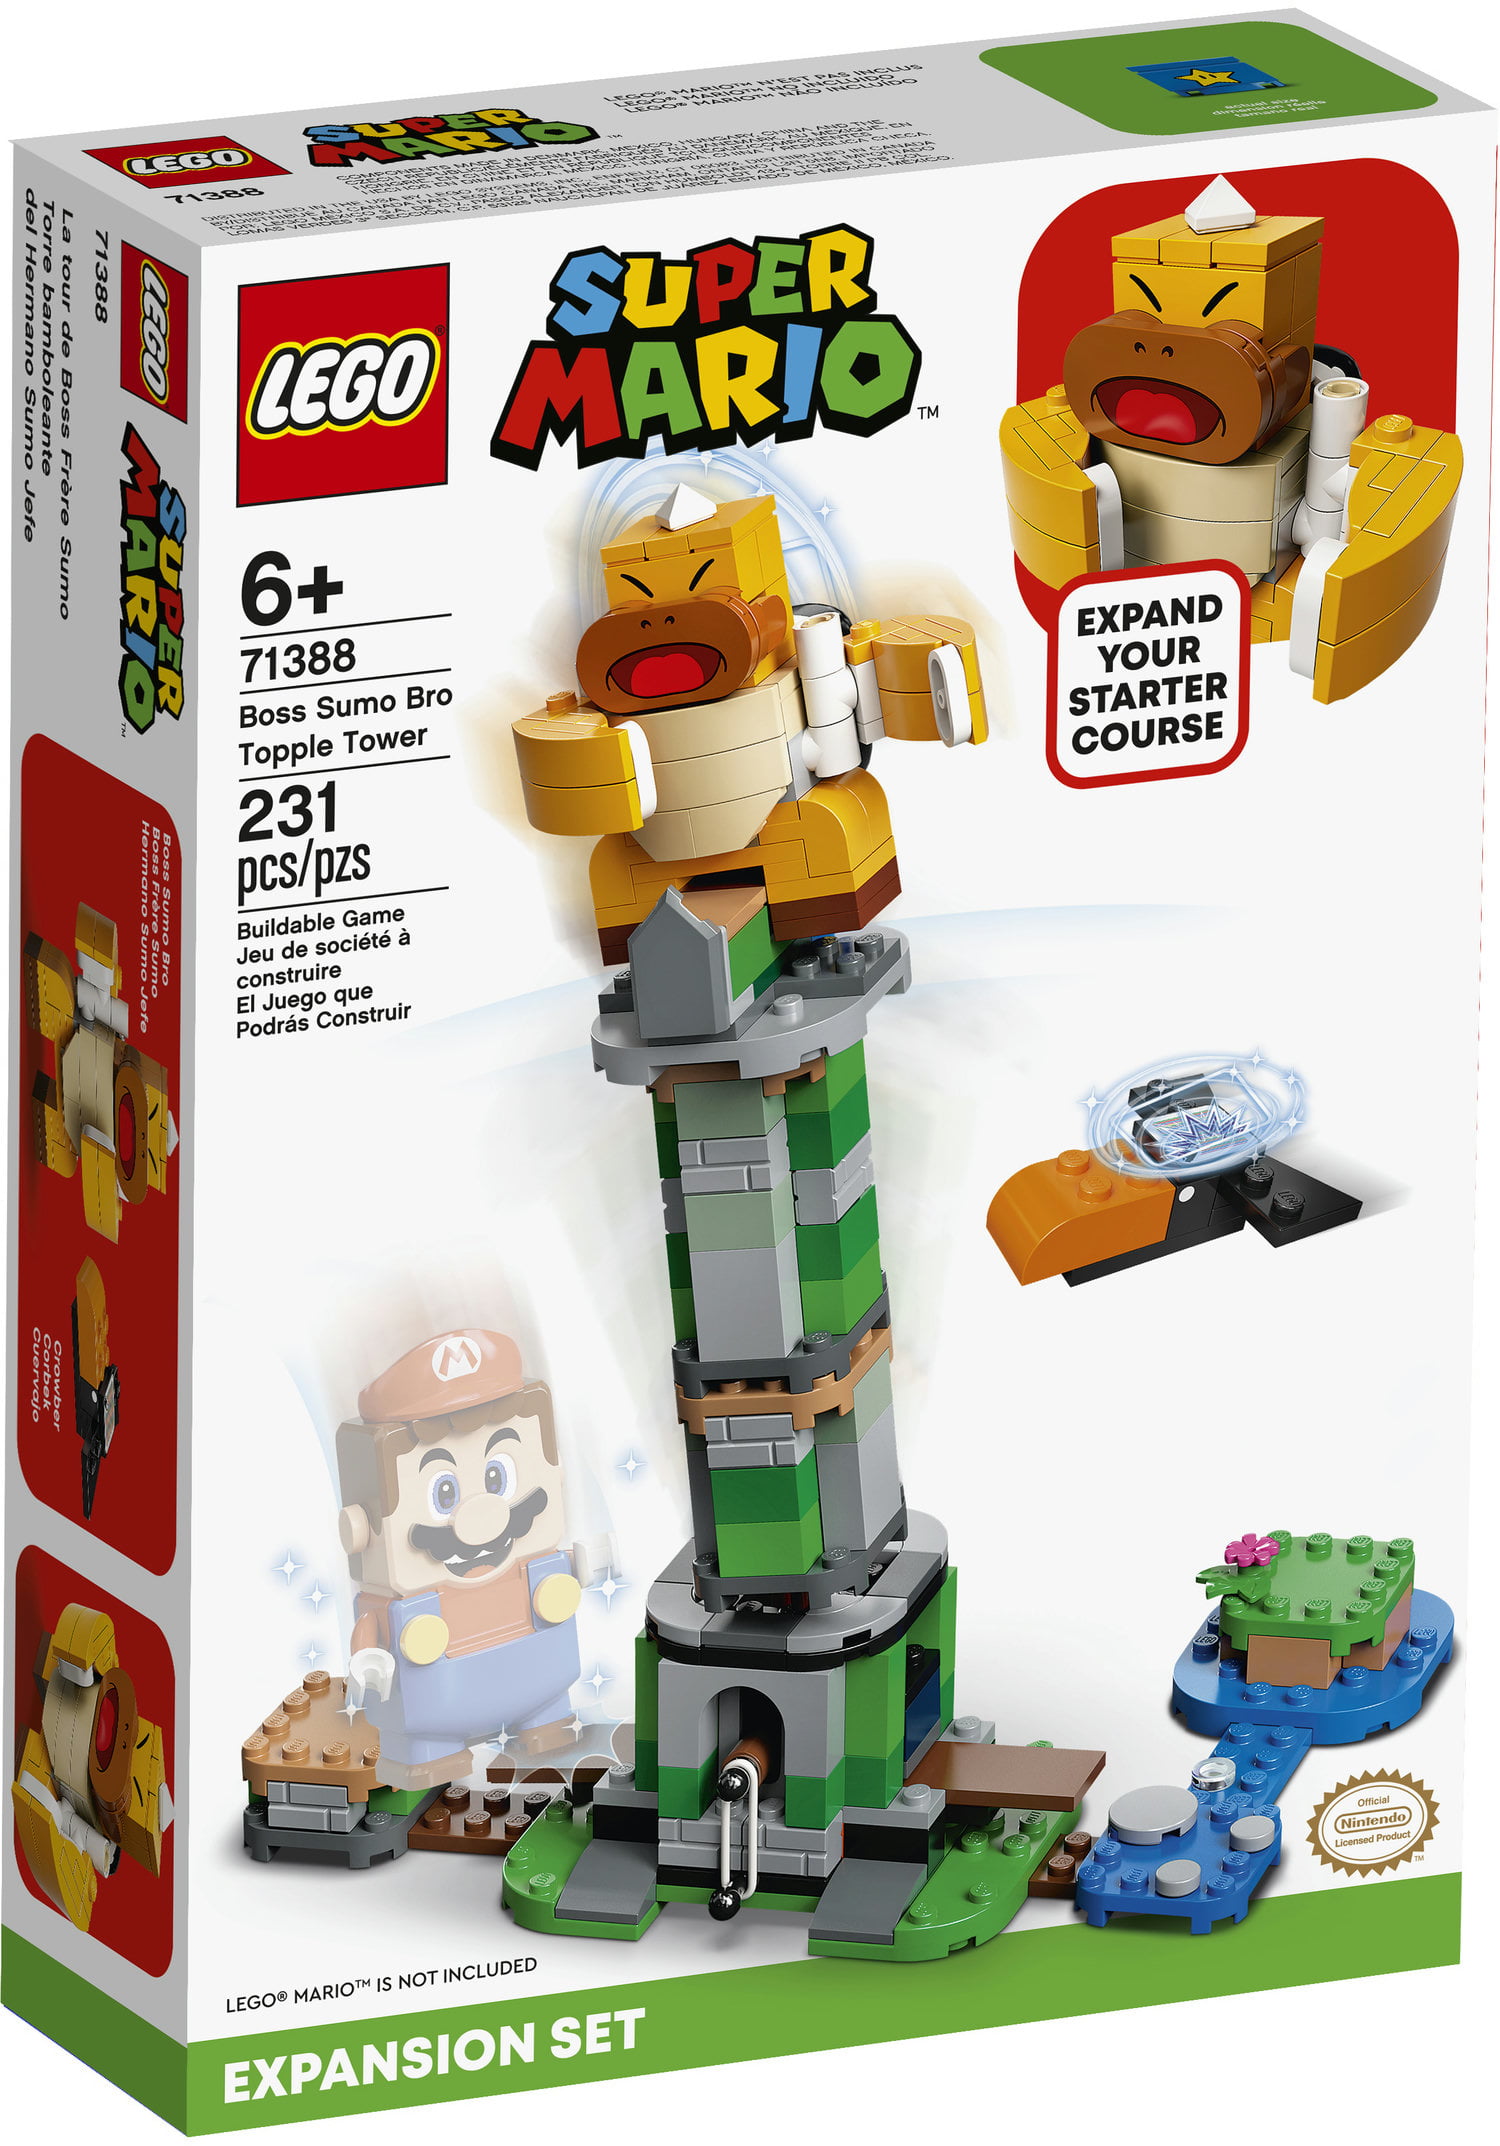 Huge Lego Build Brings Super Mario Bros. To Life With Moving Parts